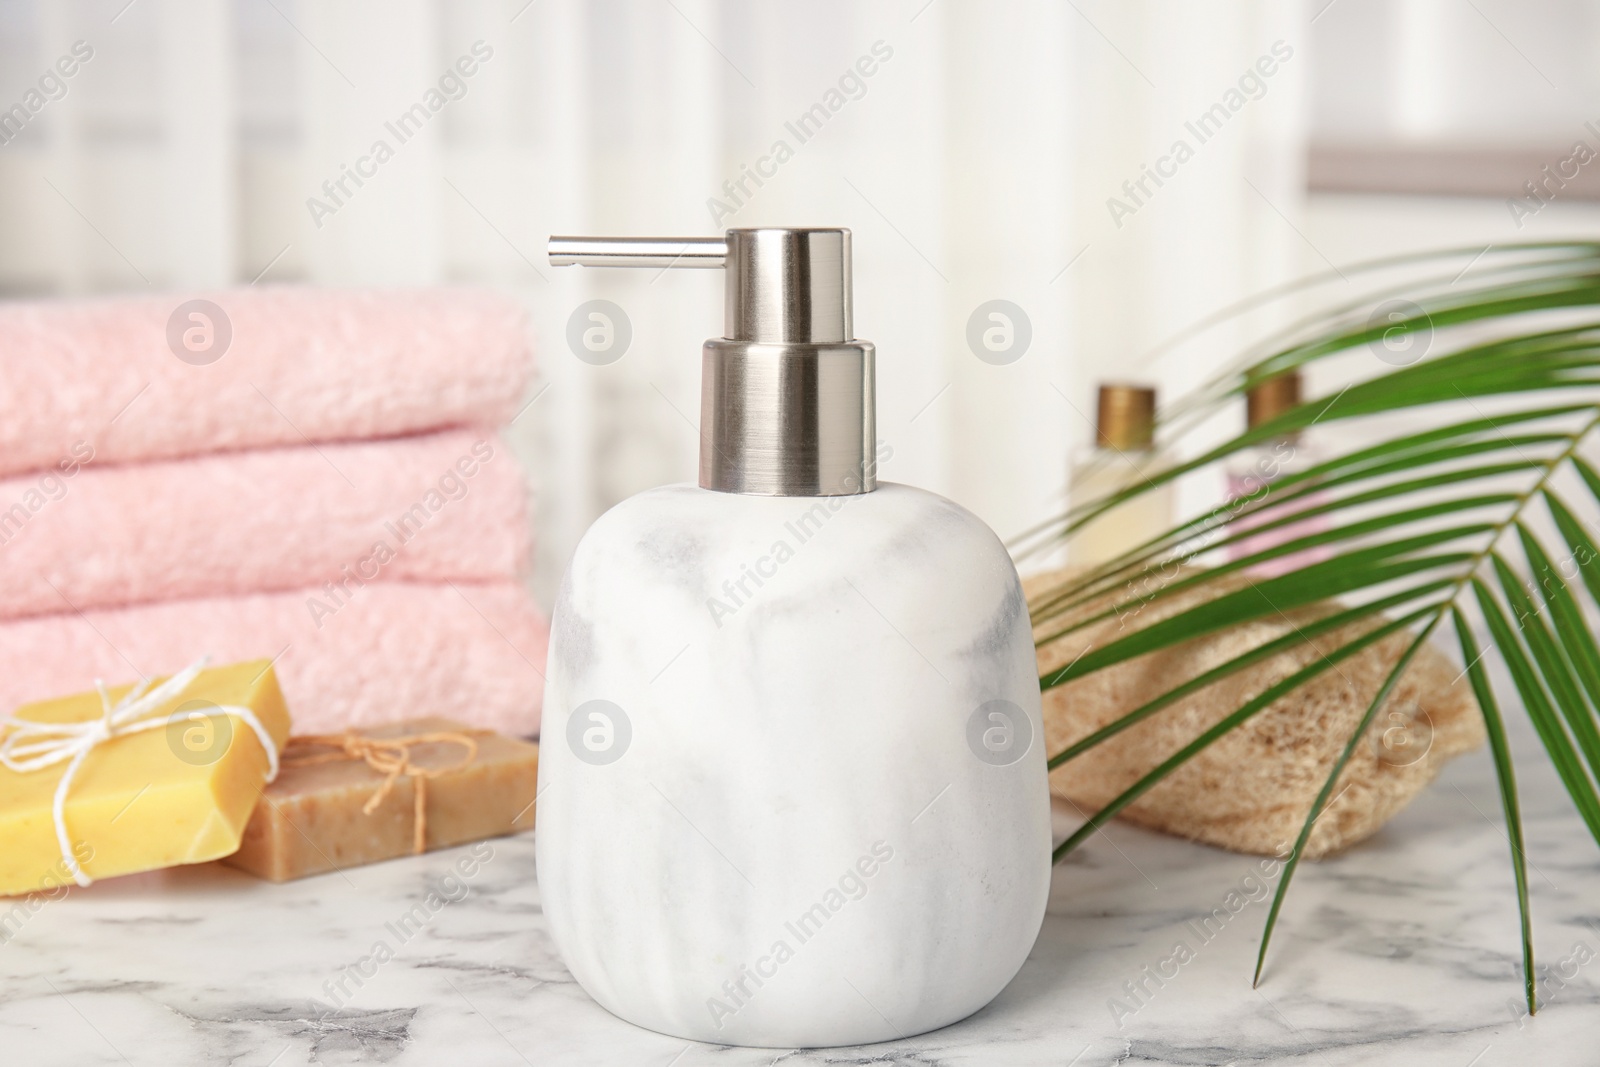 Photo of Marble dispenser, soap bars and luffa sponge on table